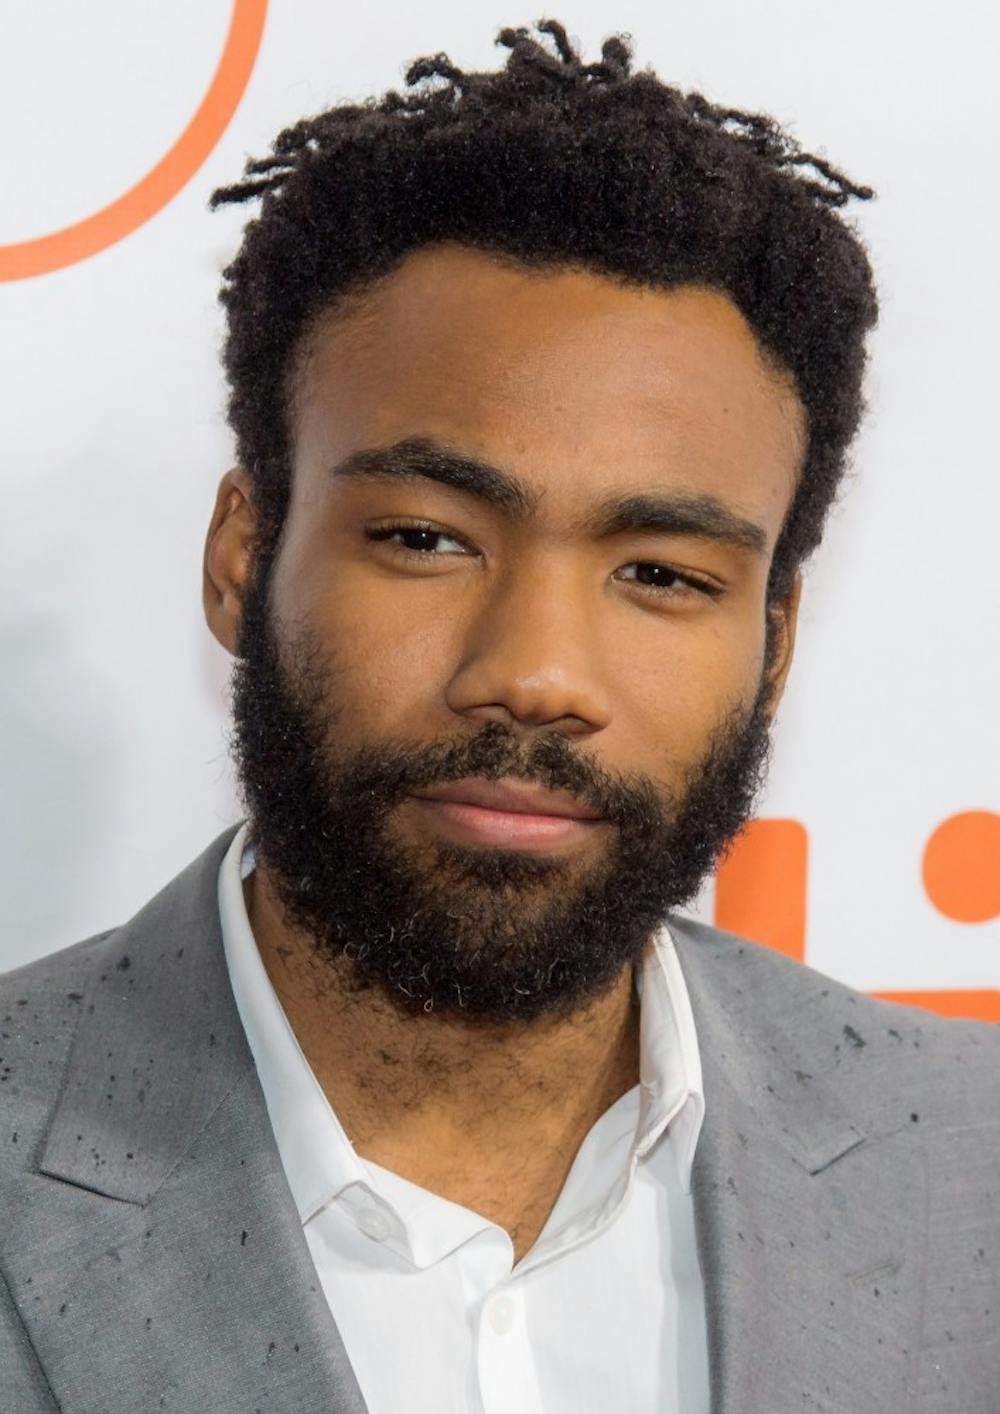 Review: Far from childish, "Atlanta" establishes Donald Glover as an industry force